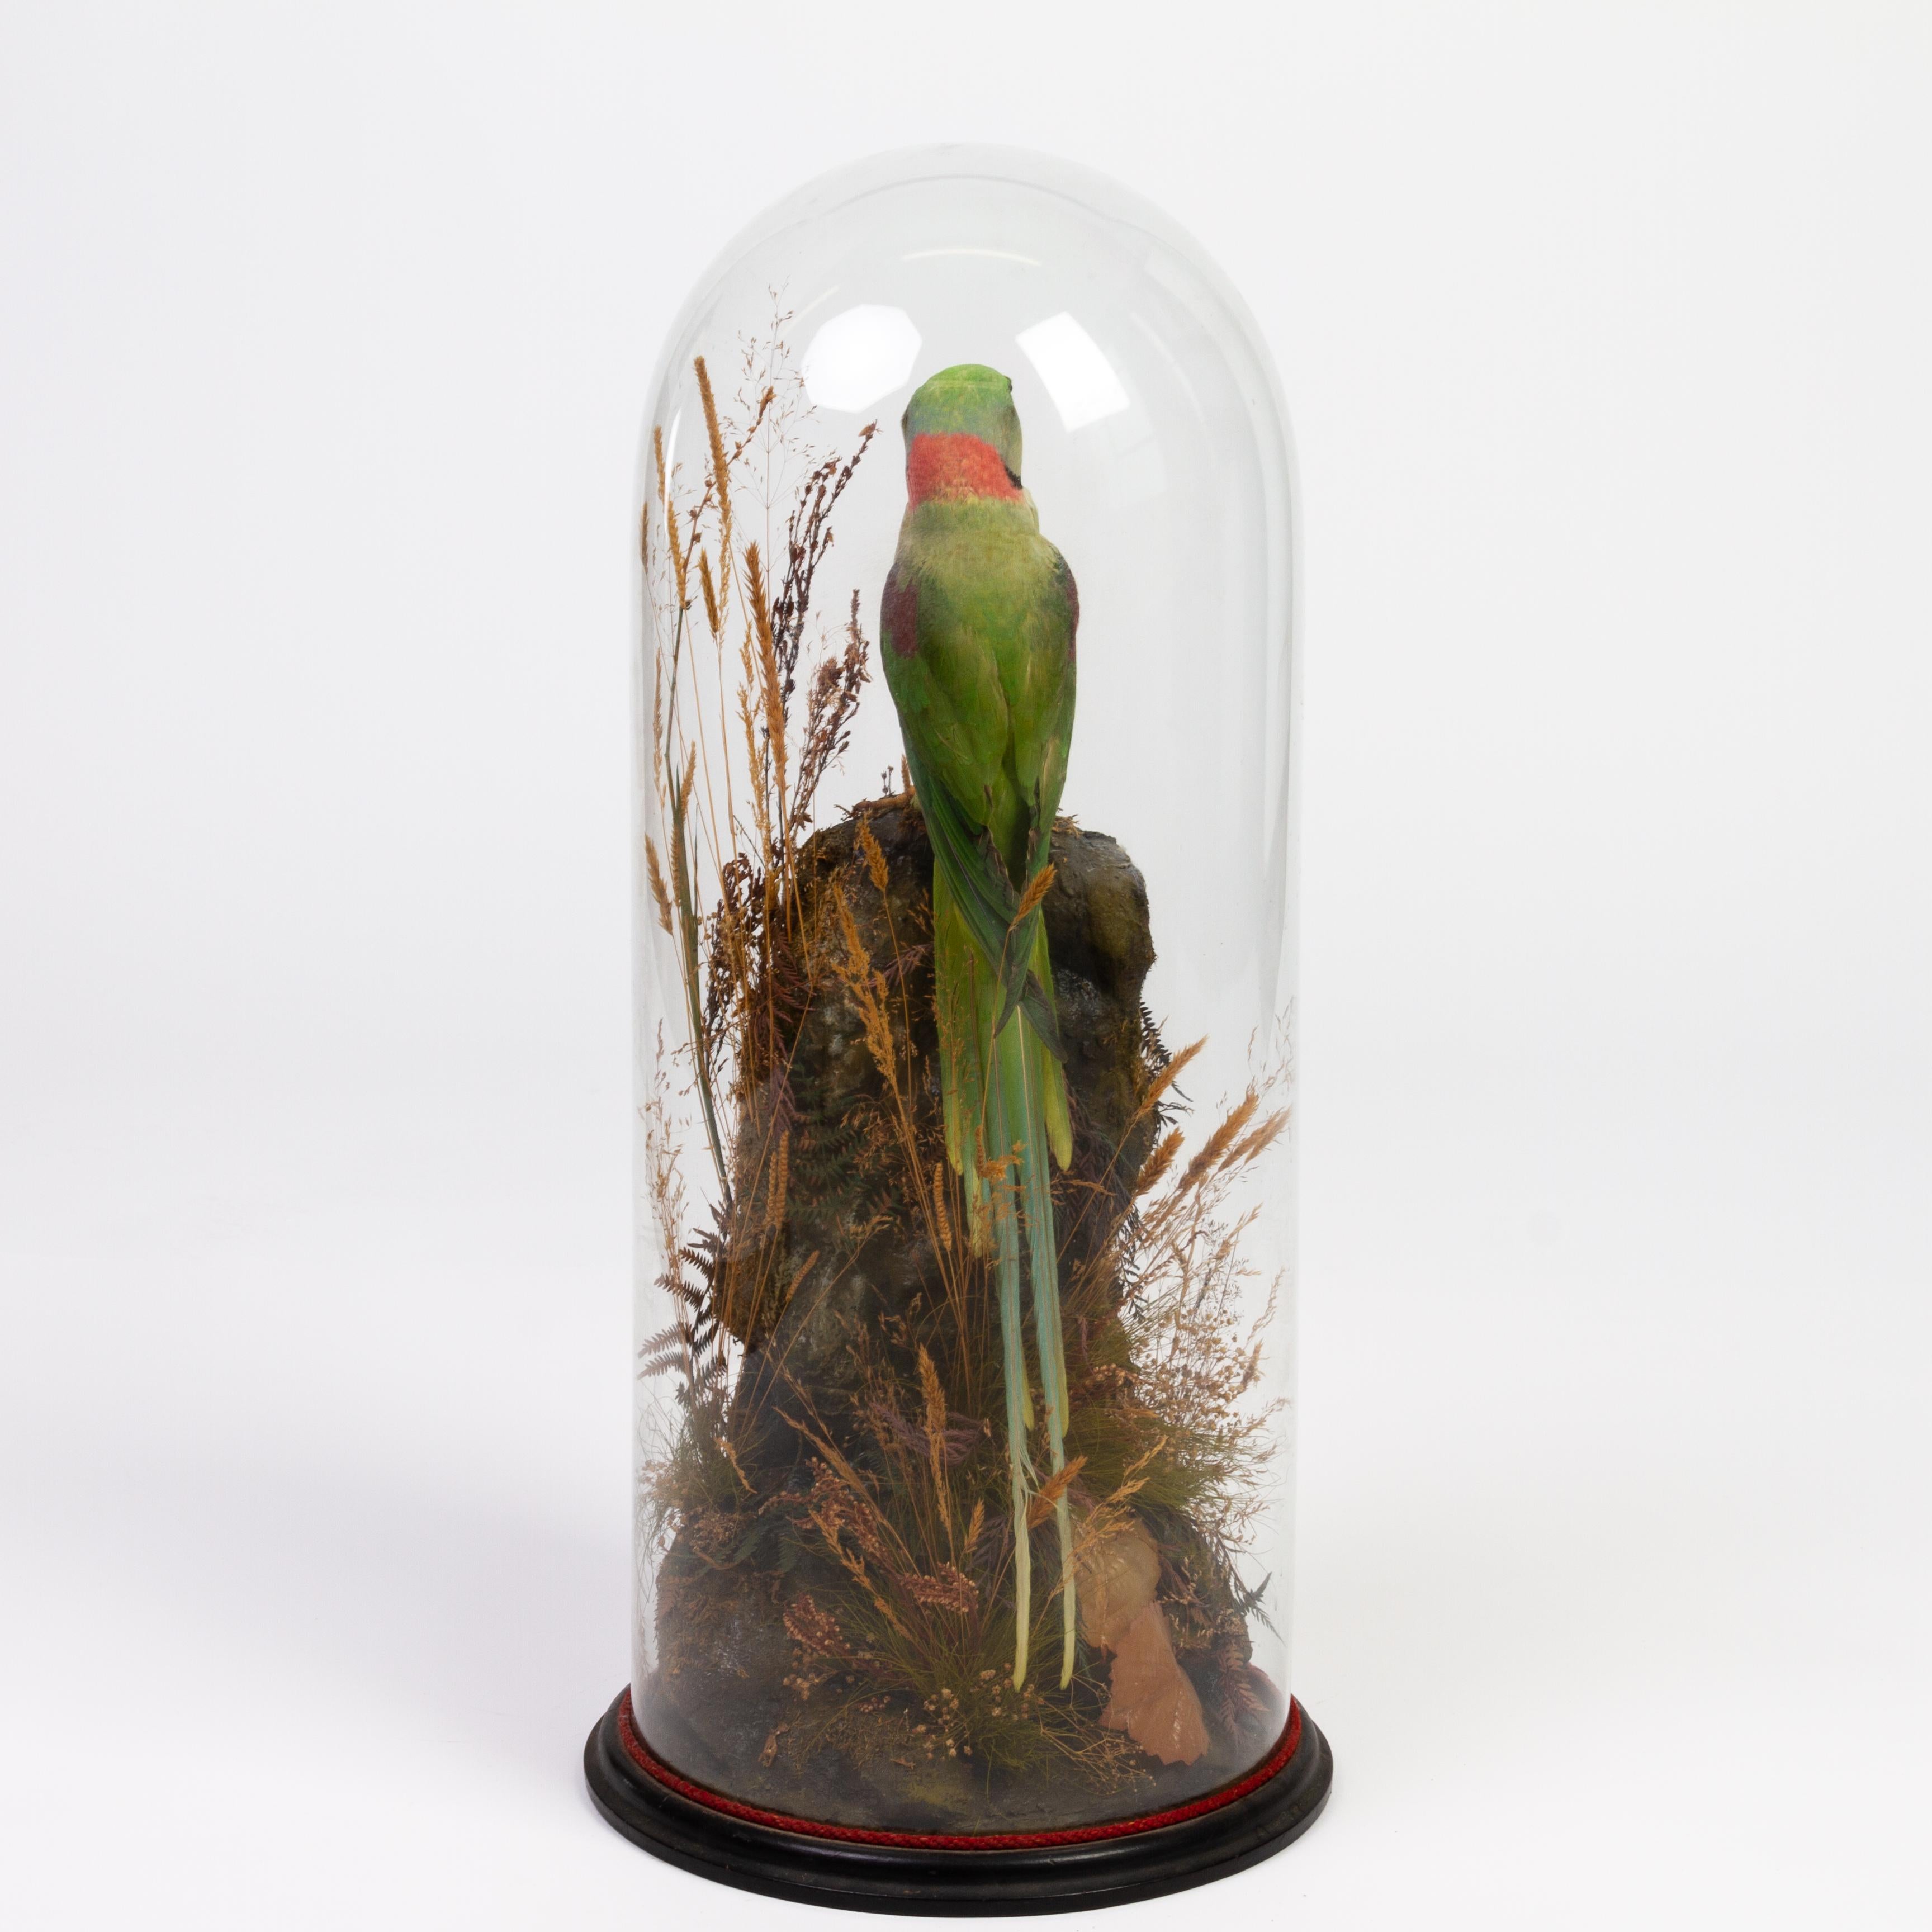 Glass Indian Ring-Necked Victorian Taxidermy Parakeet Parrot Under Dome 19th Century 